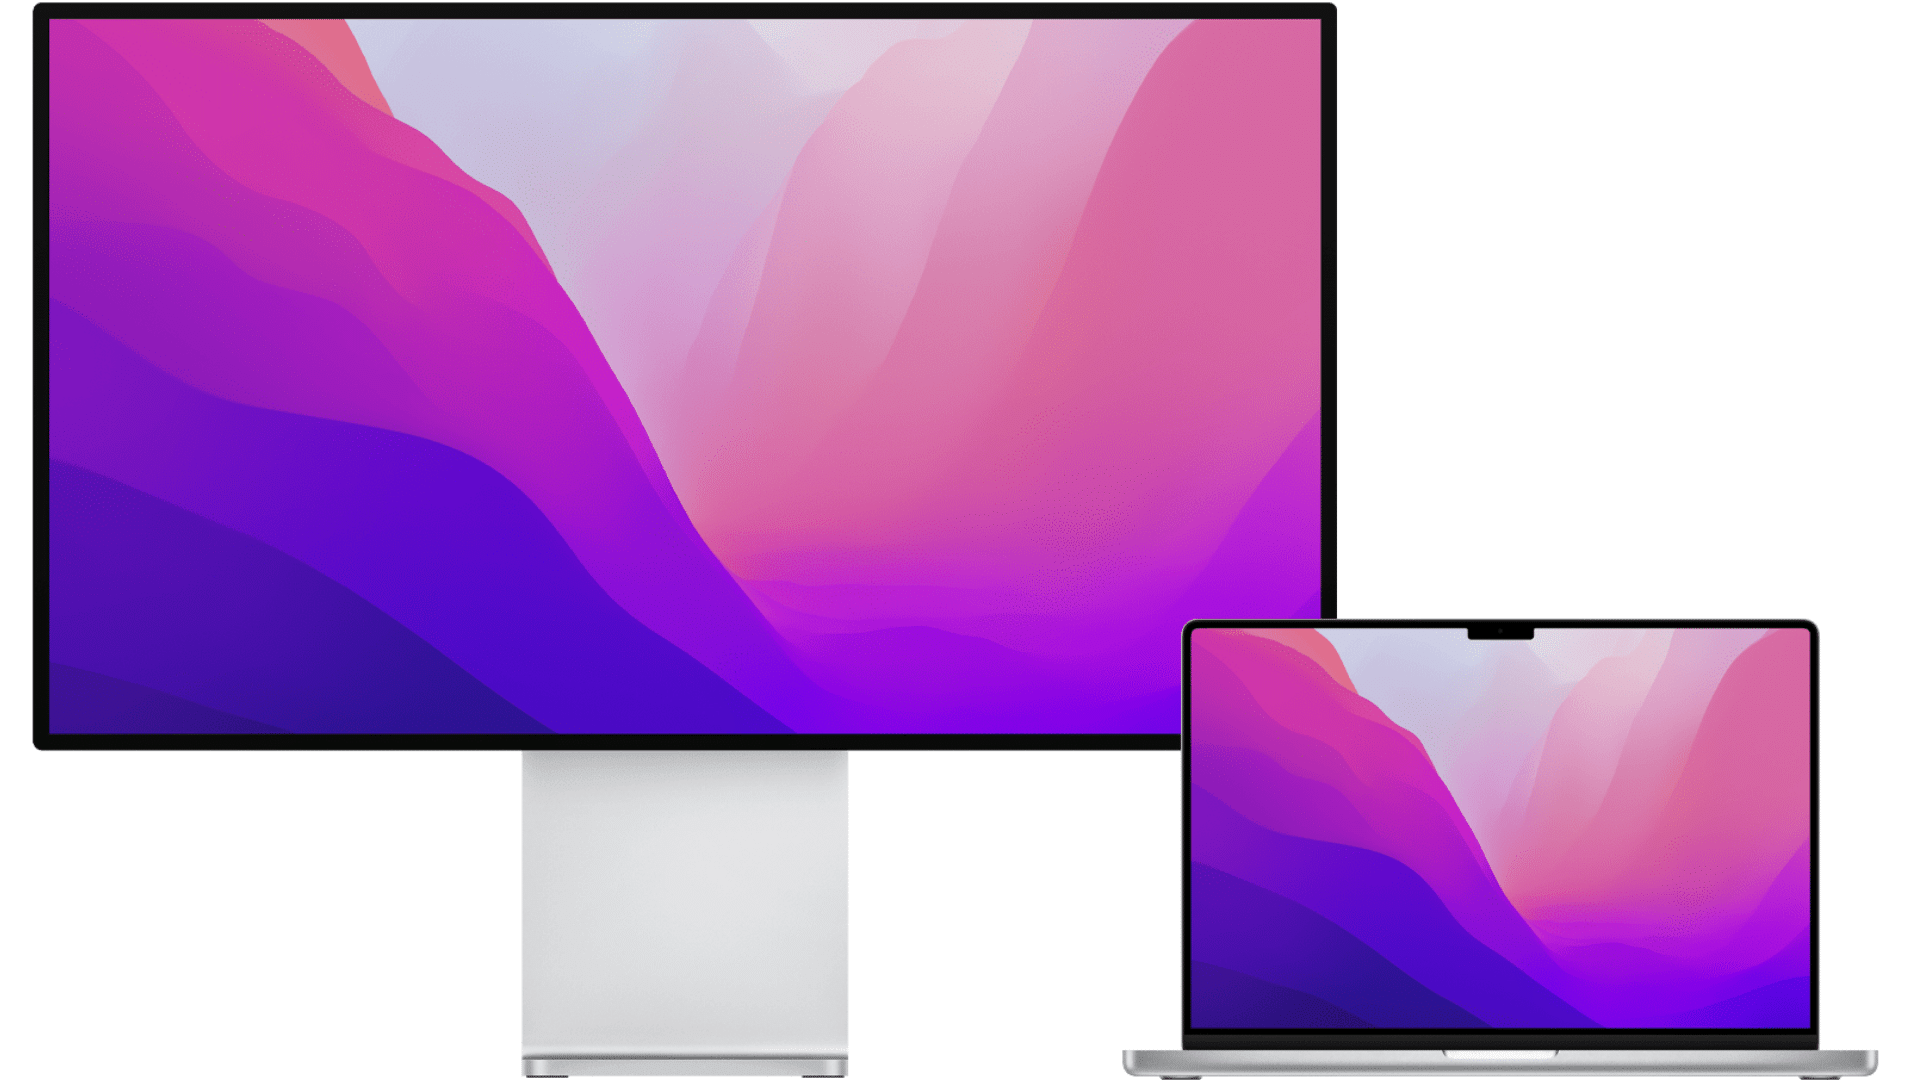 How to mirror a mac to TV